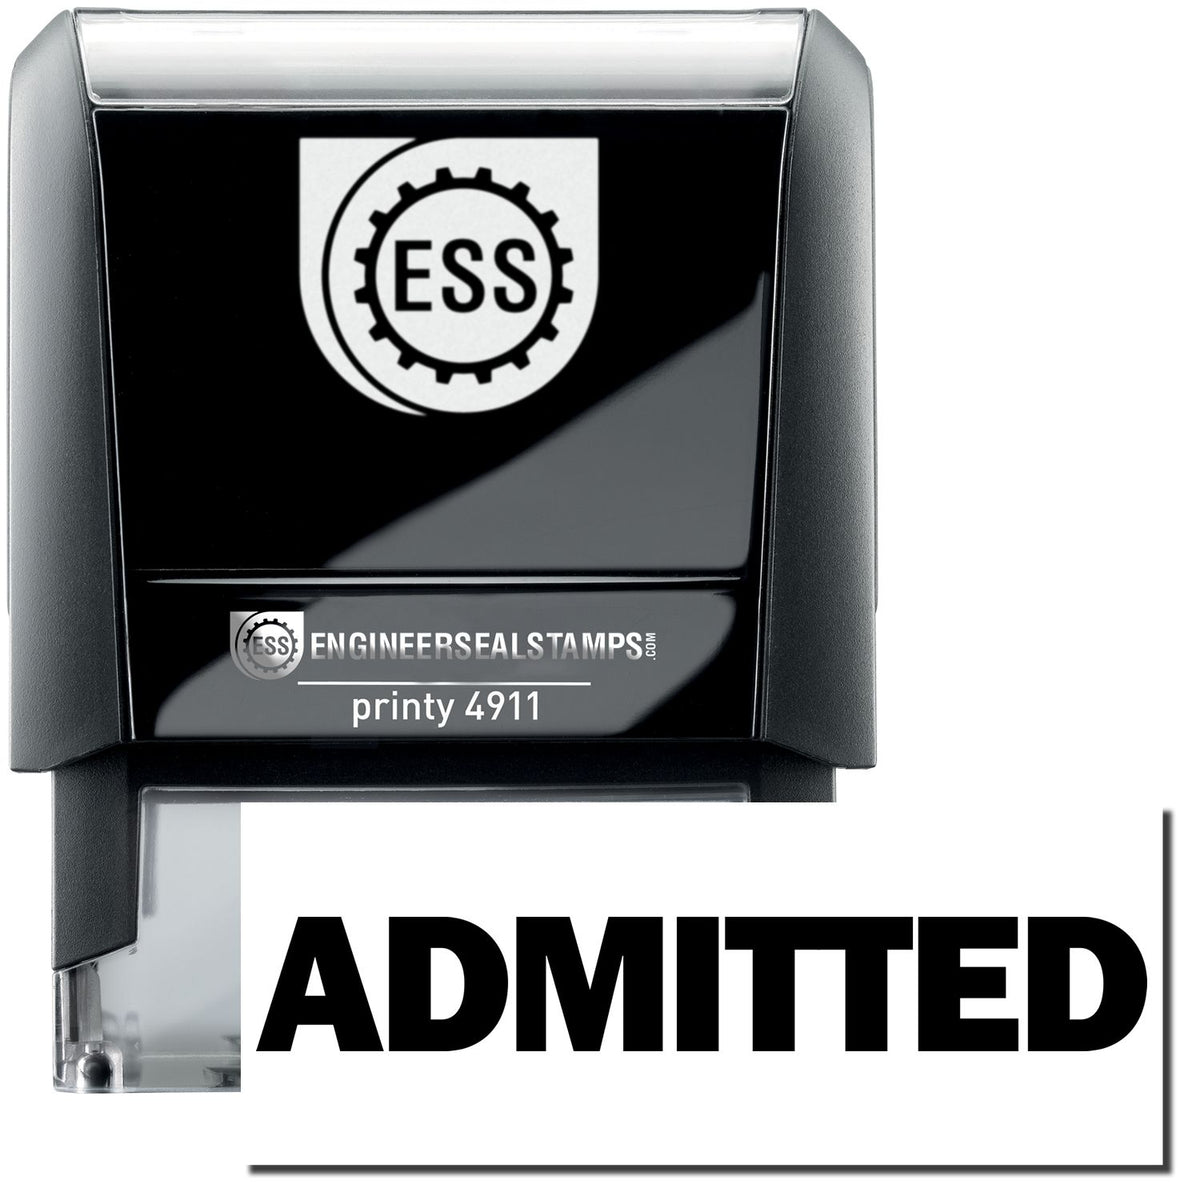 A self-inking stamp with a stamped image showing how the text &quot;ADMITTED&quot; in bold font is displayed after stamping.